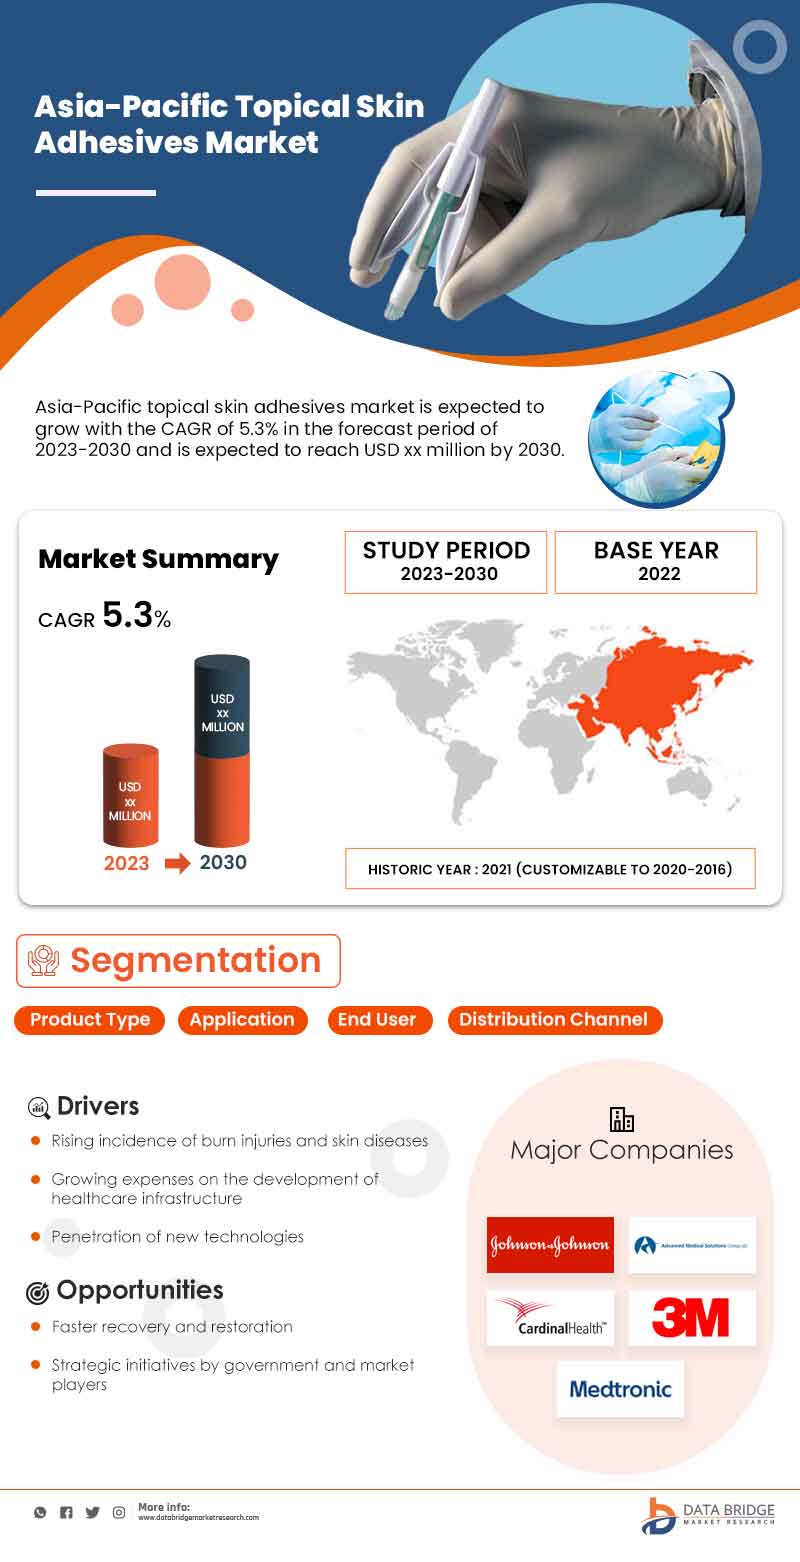 Asia-Pacific Topical Skin Adhesive Market